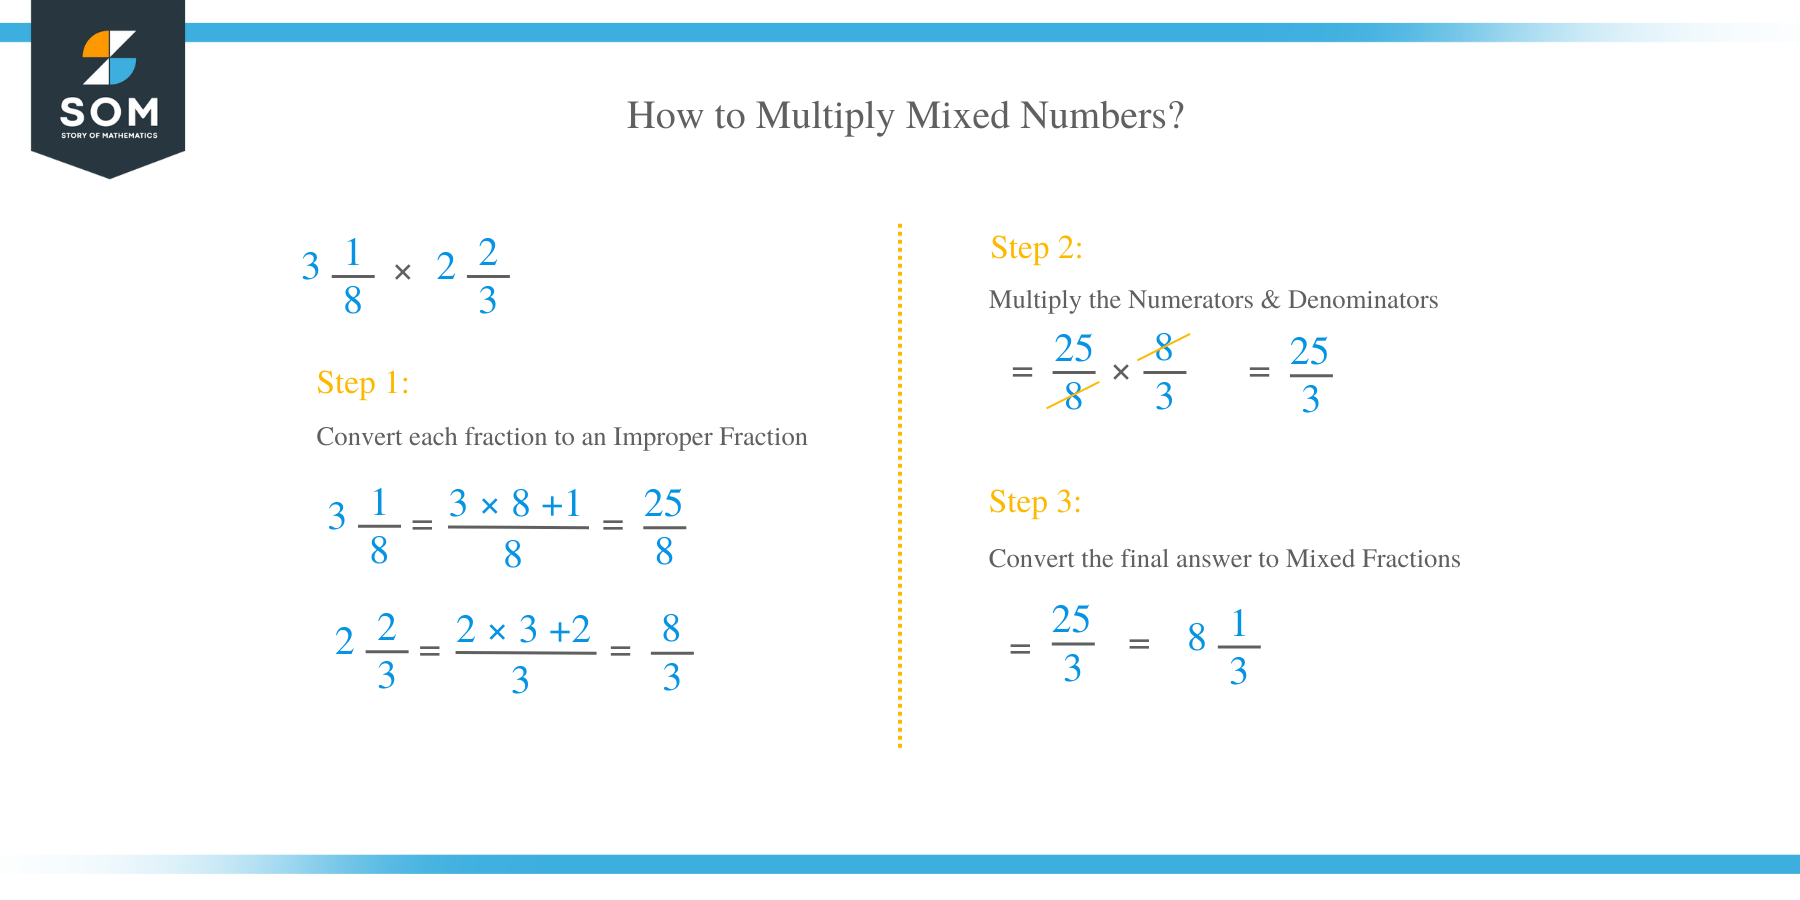 How to Multiply Mixed Numbers?